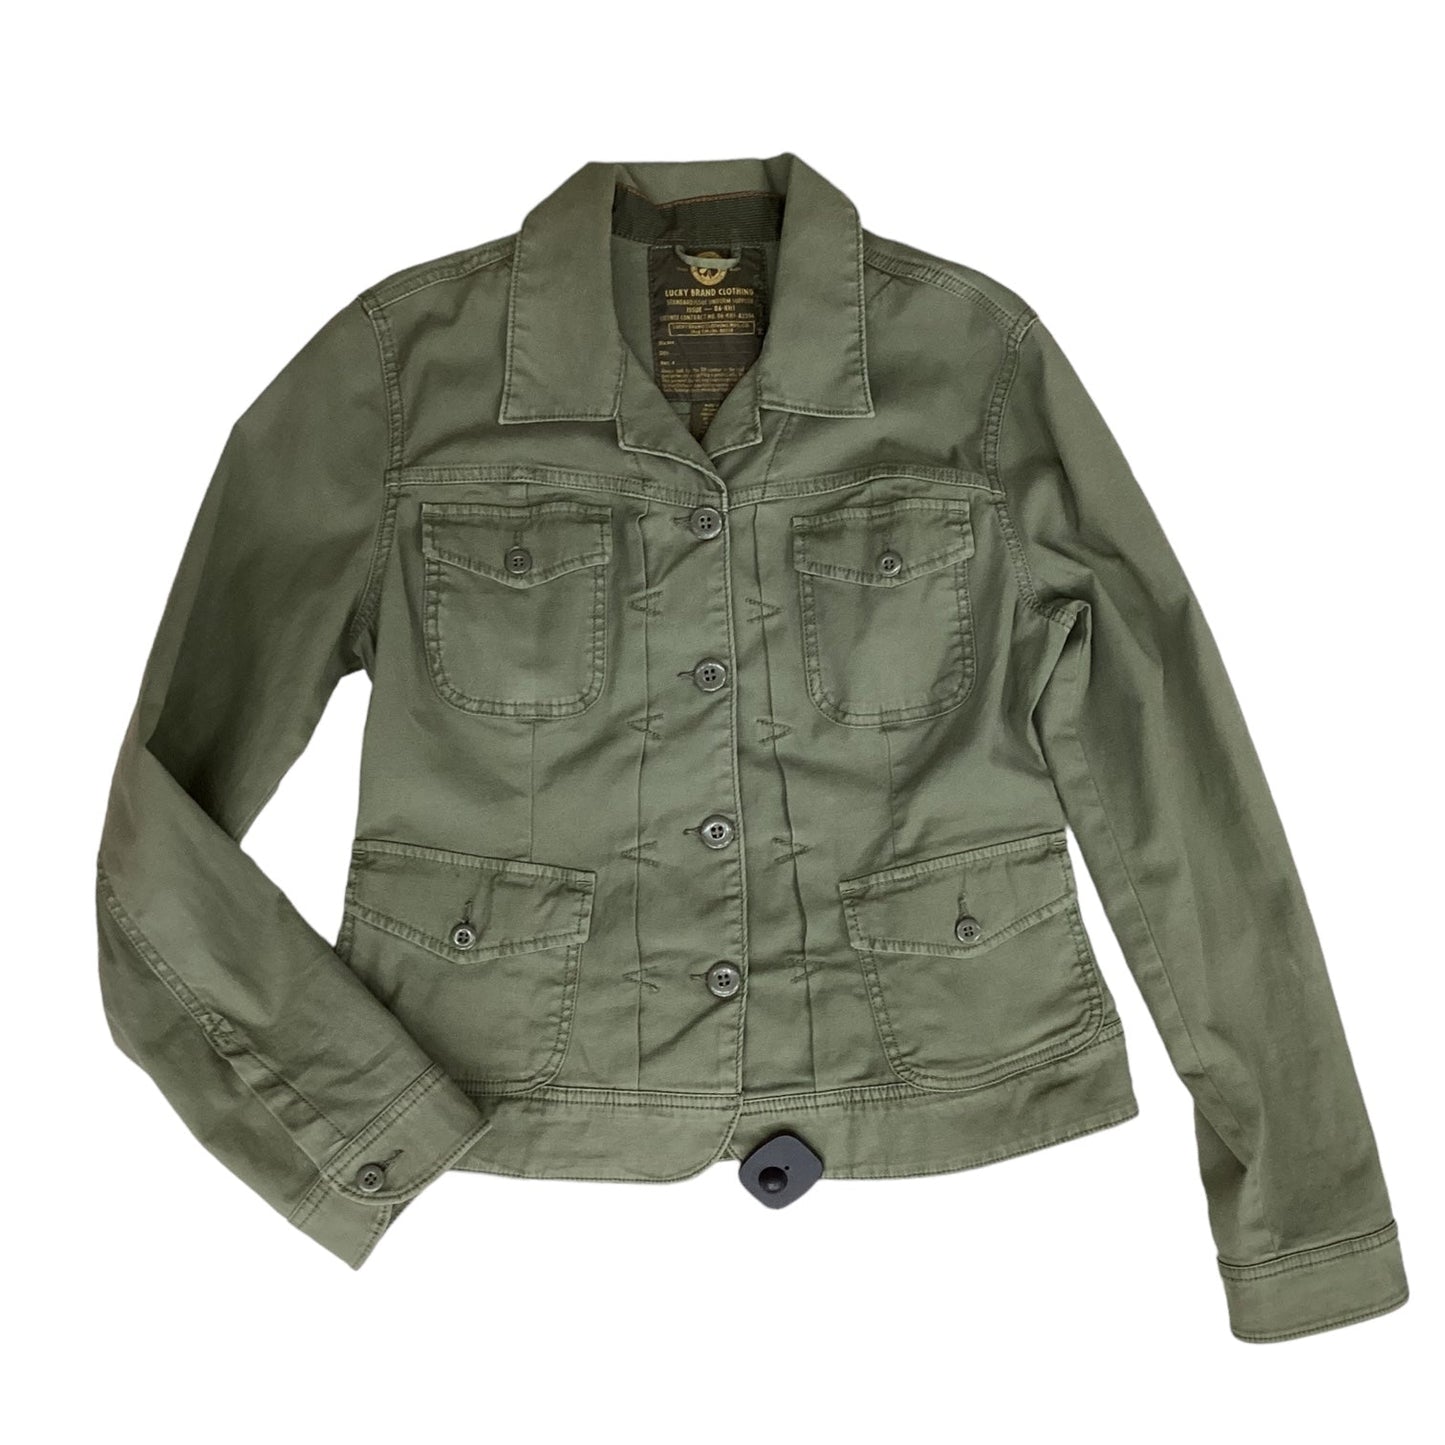 Green Jacket Other Lucky Brand, Size L